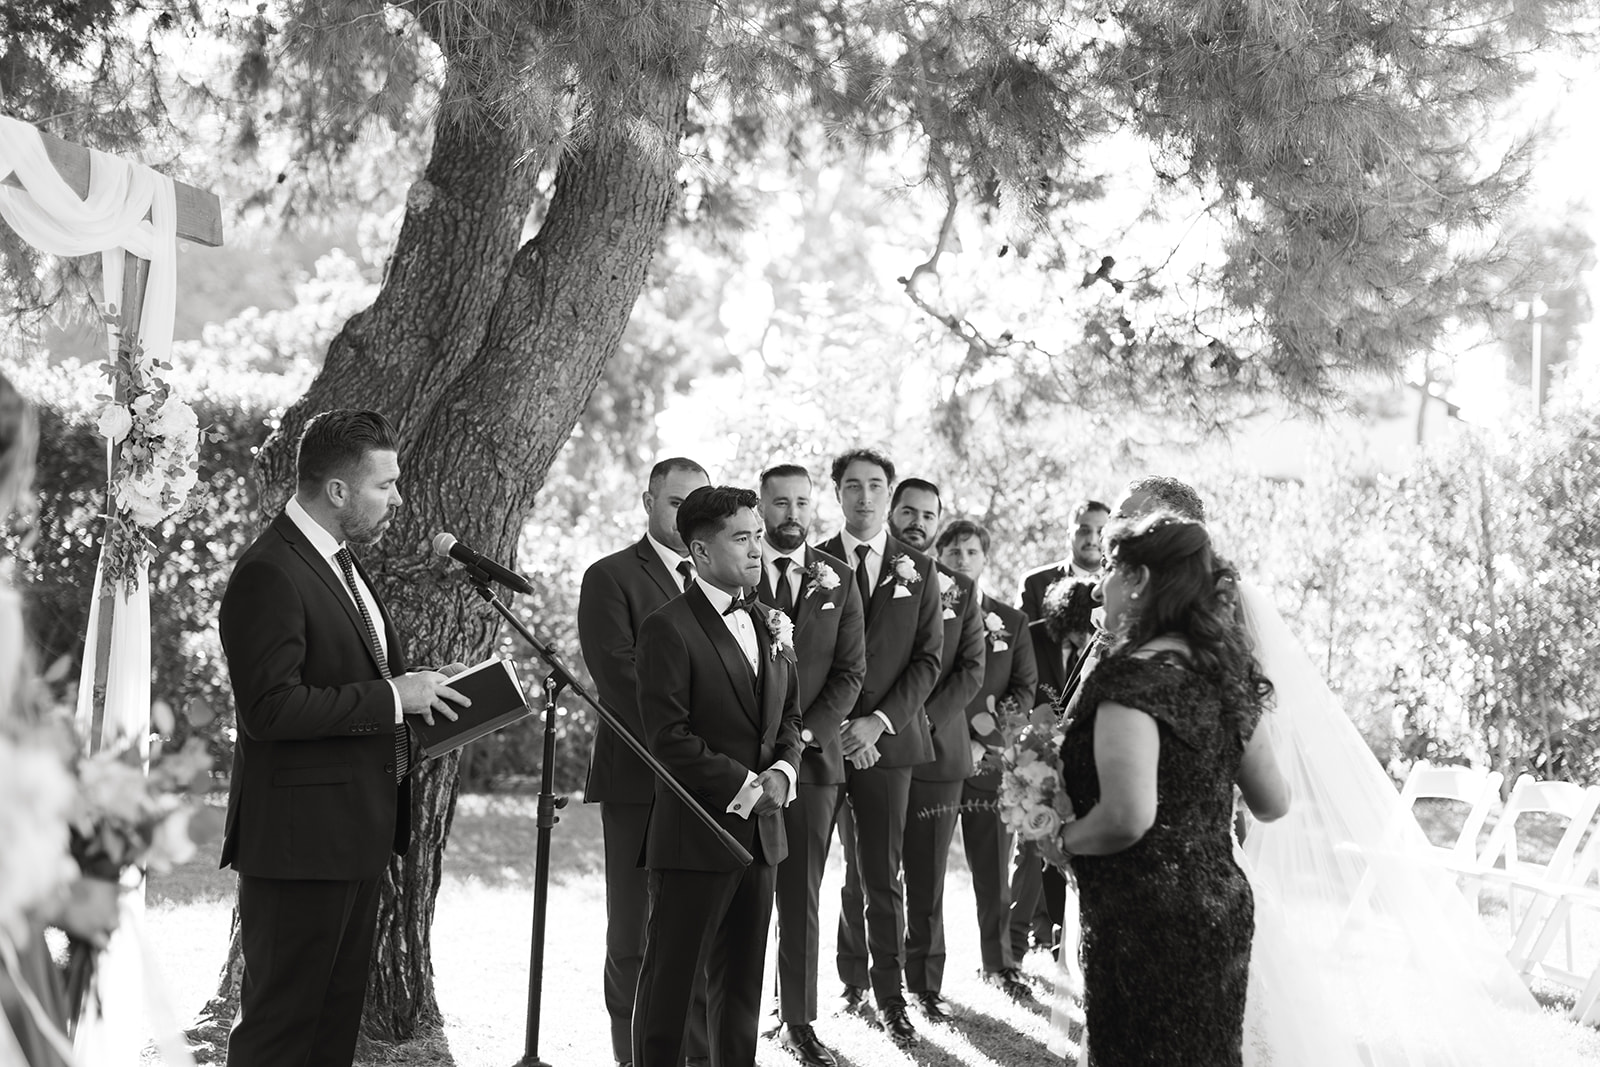 griffith house wedding anaheim california emotional ceremony ring exchanging sunny outdoor ceremony bride and groom